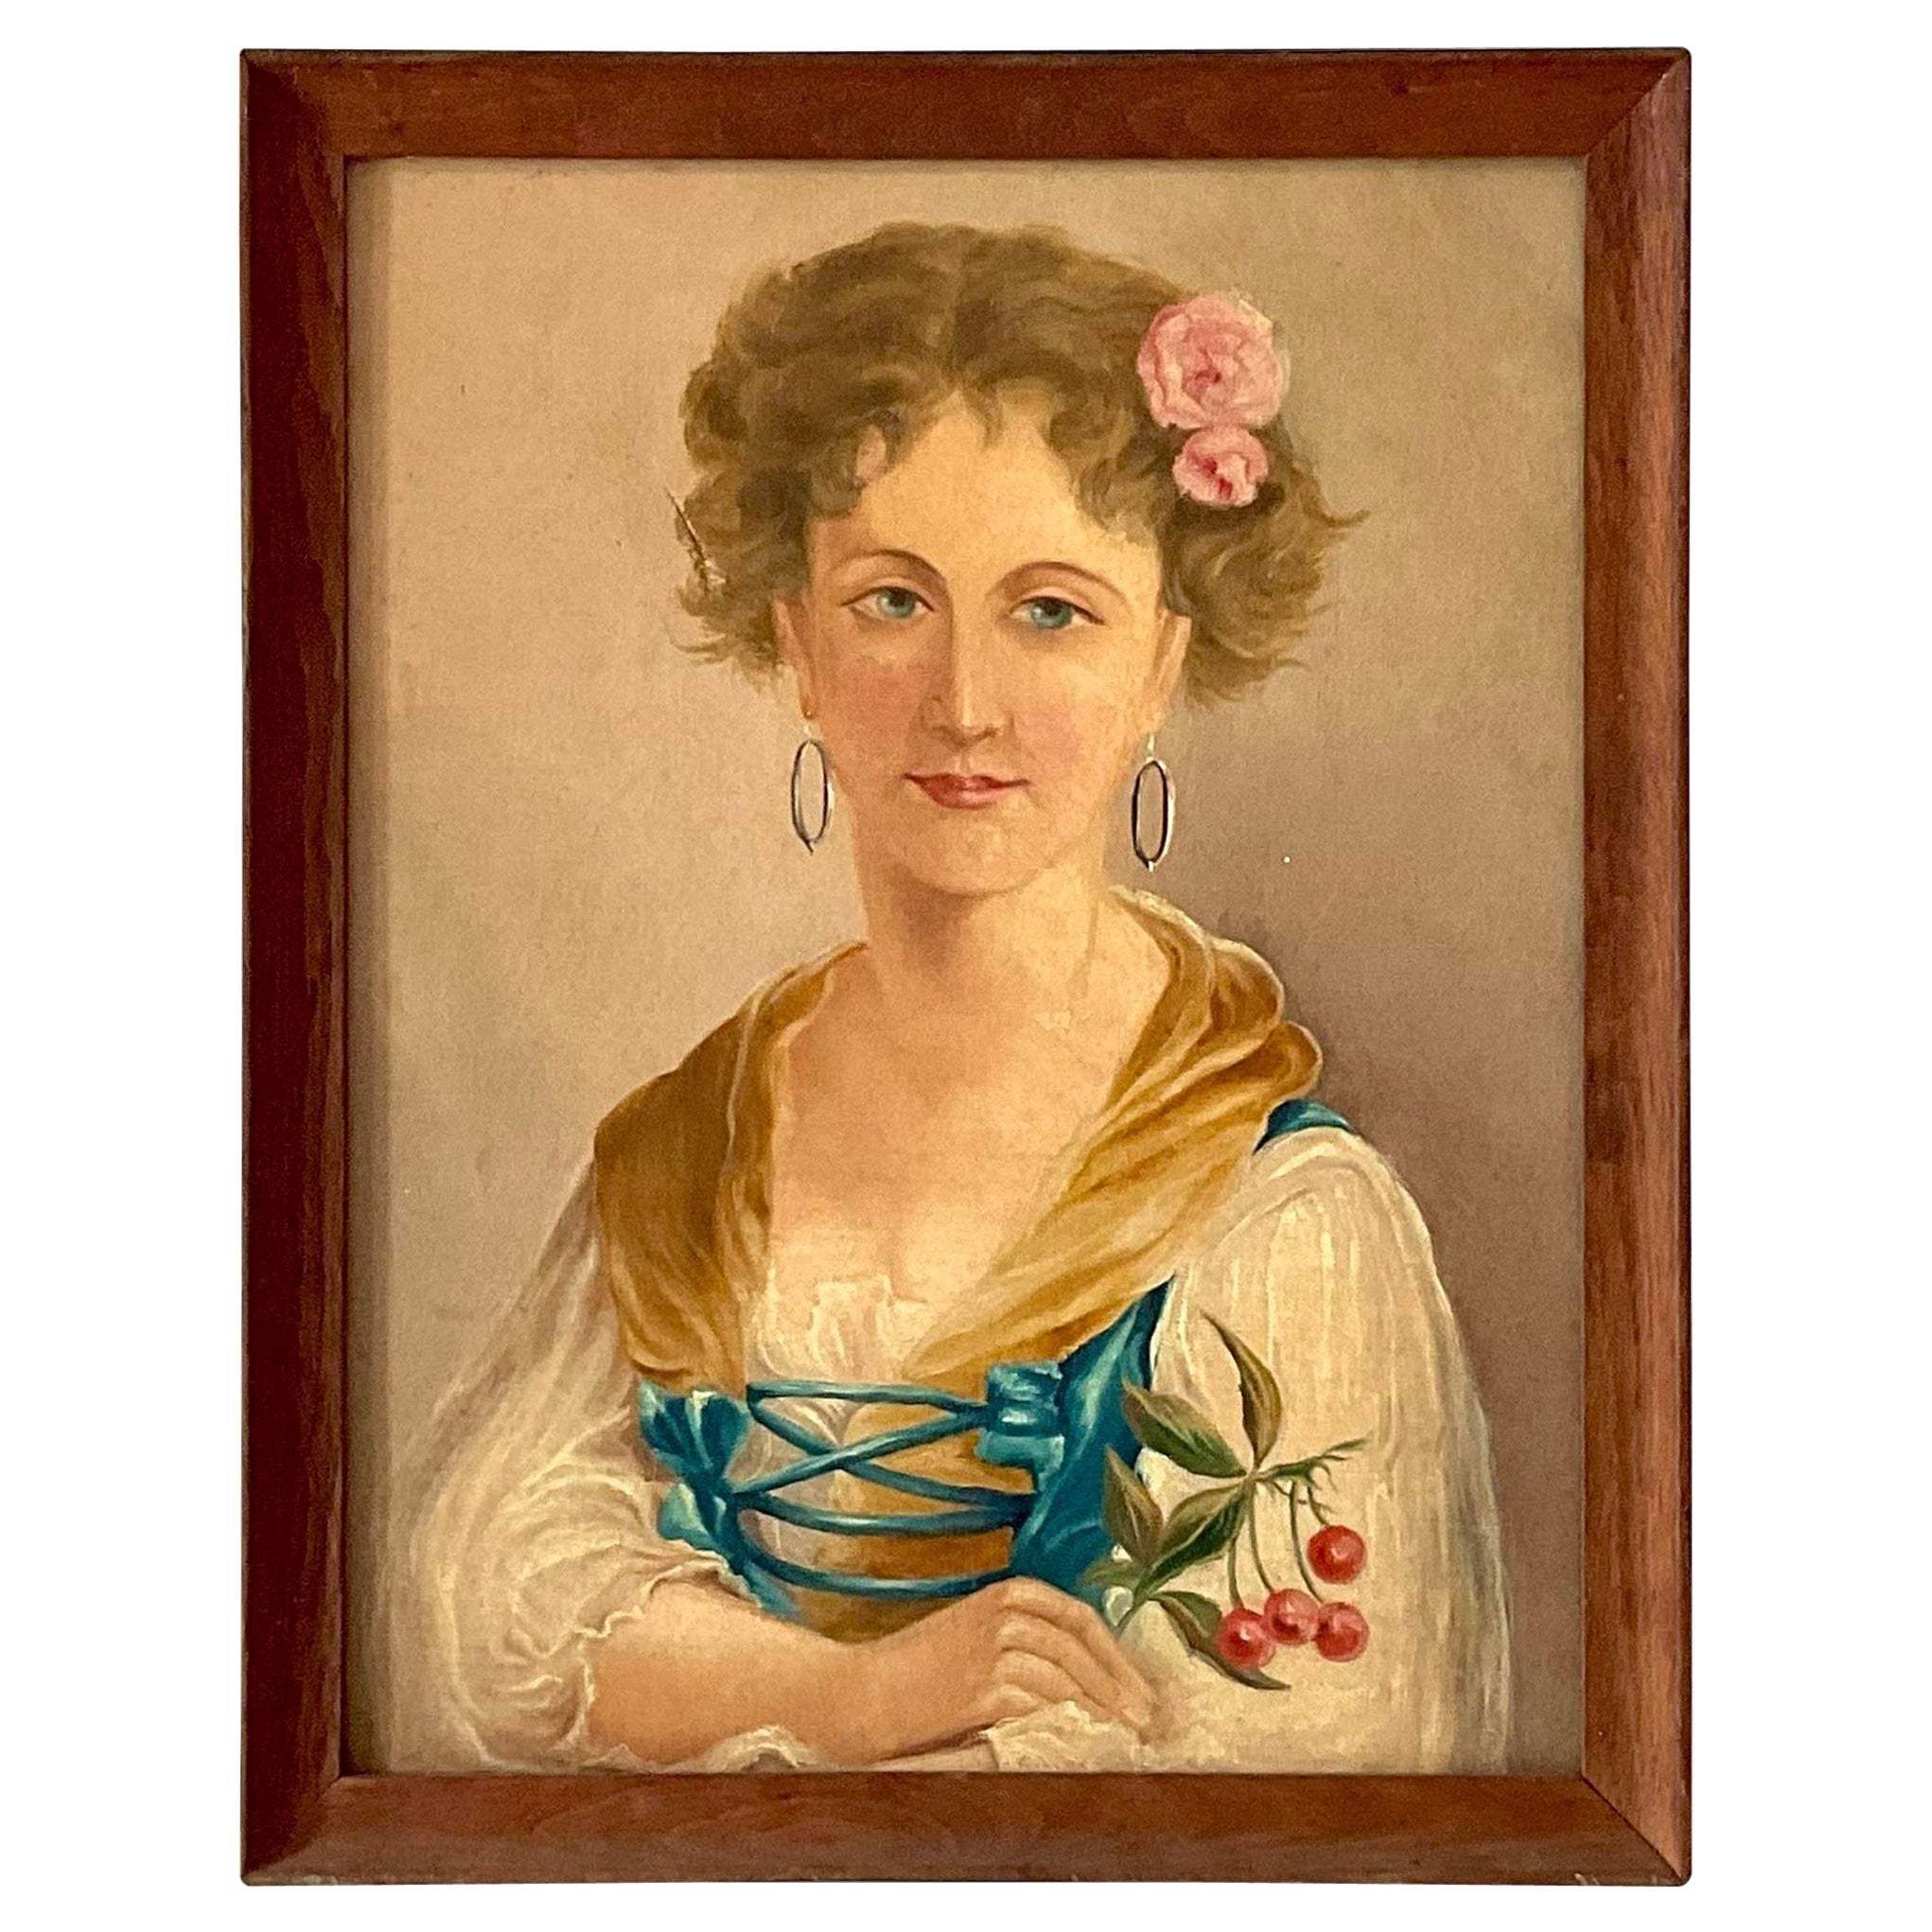 Early 20th Century Vintage Boho Original Oil Portrait of a Woman With Flowers